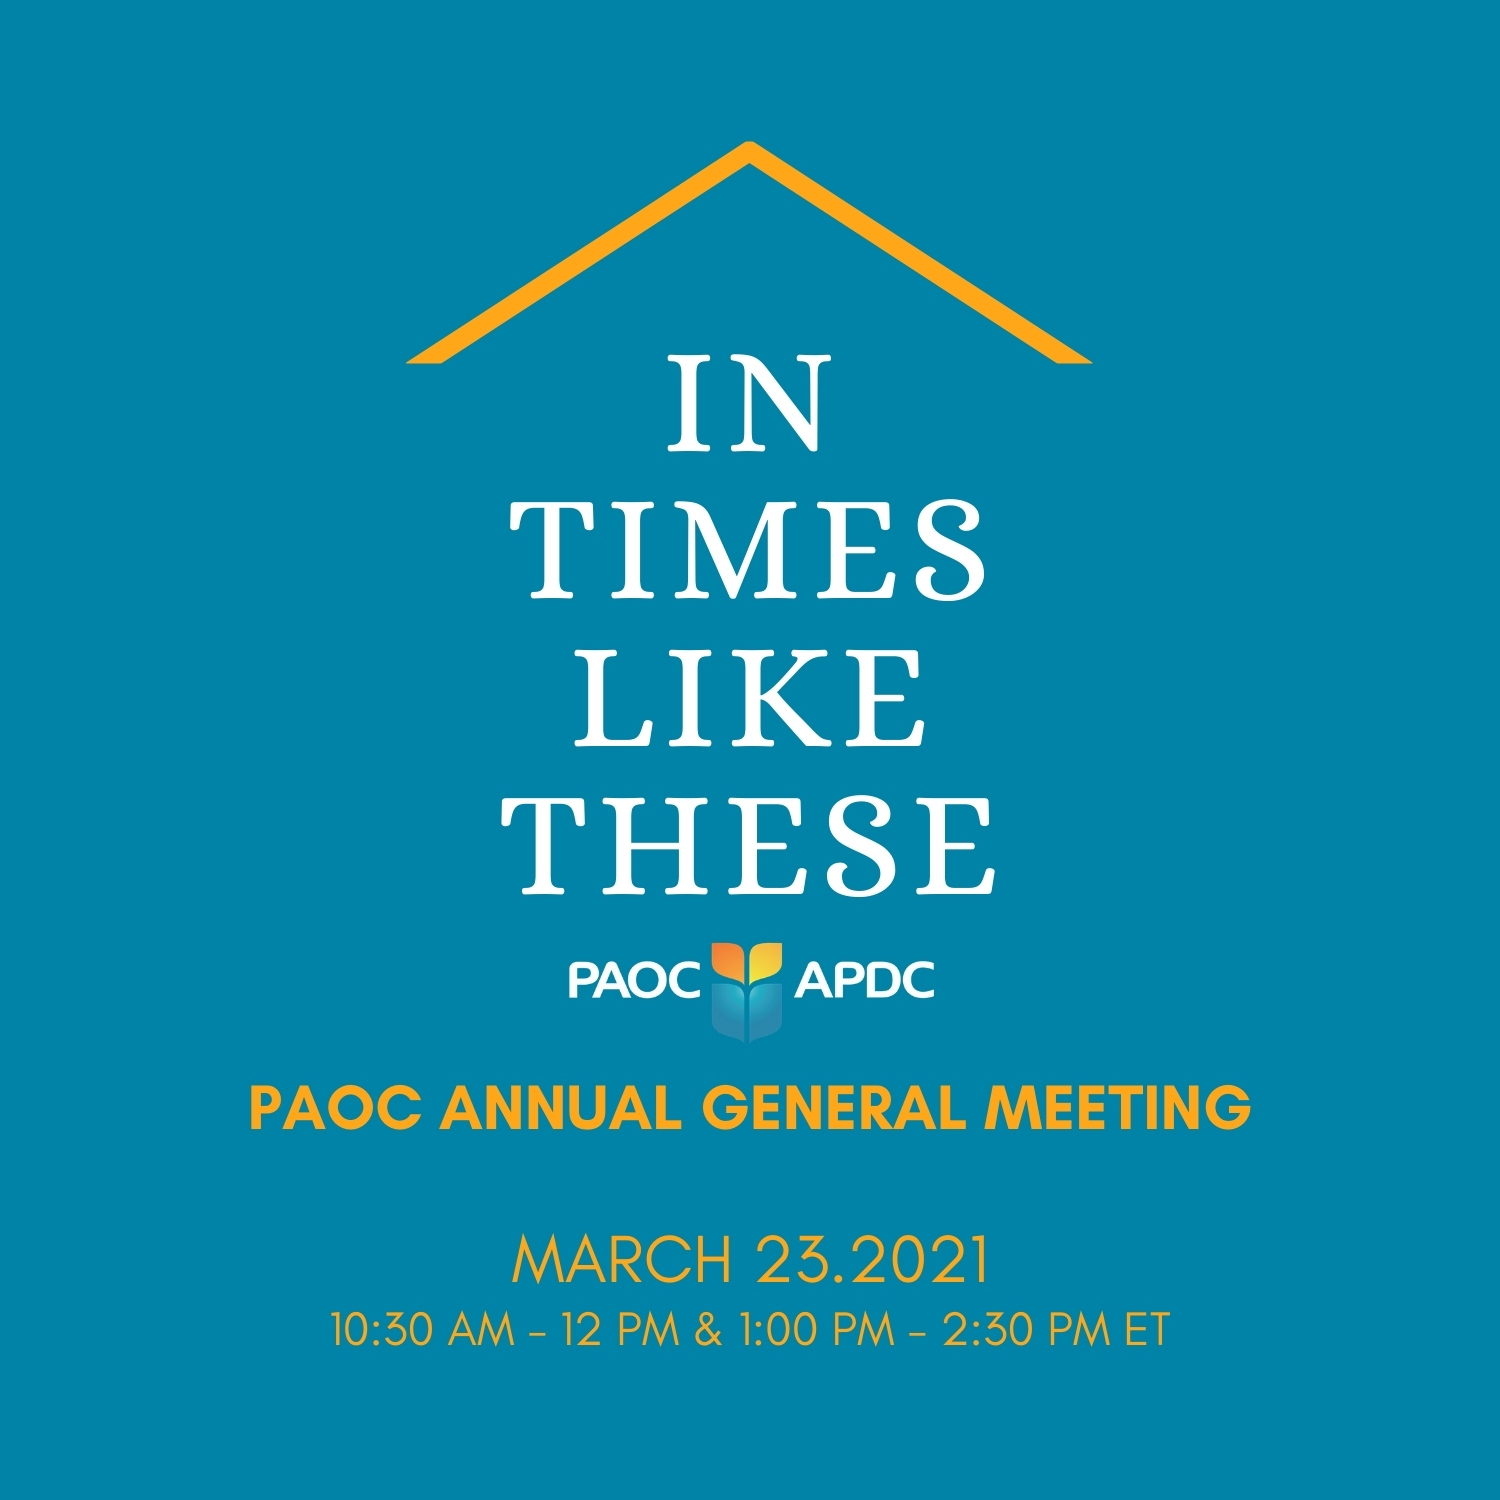 PAOC AGM 2021 Branding - In Times Like These